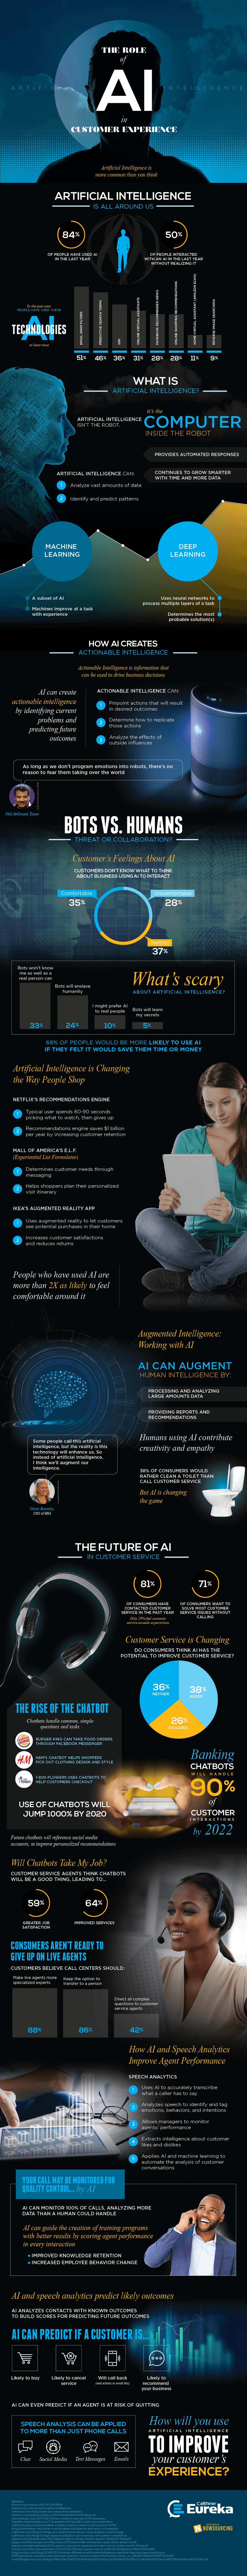 How AI = Superior Customer Experience - Infographic